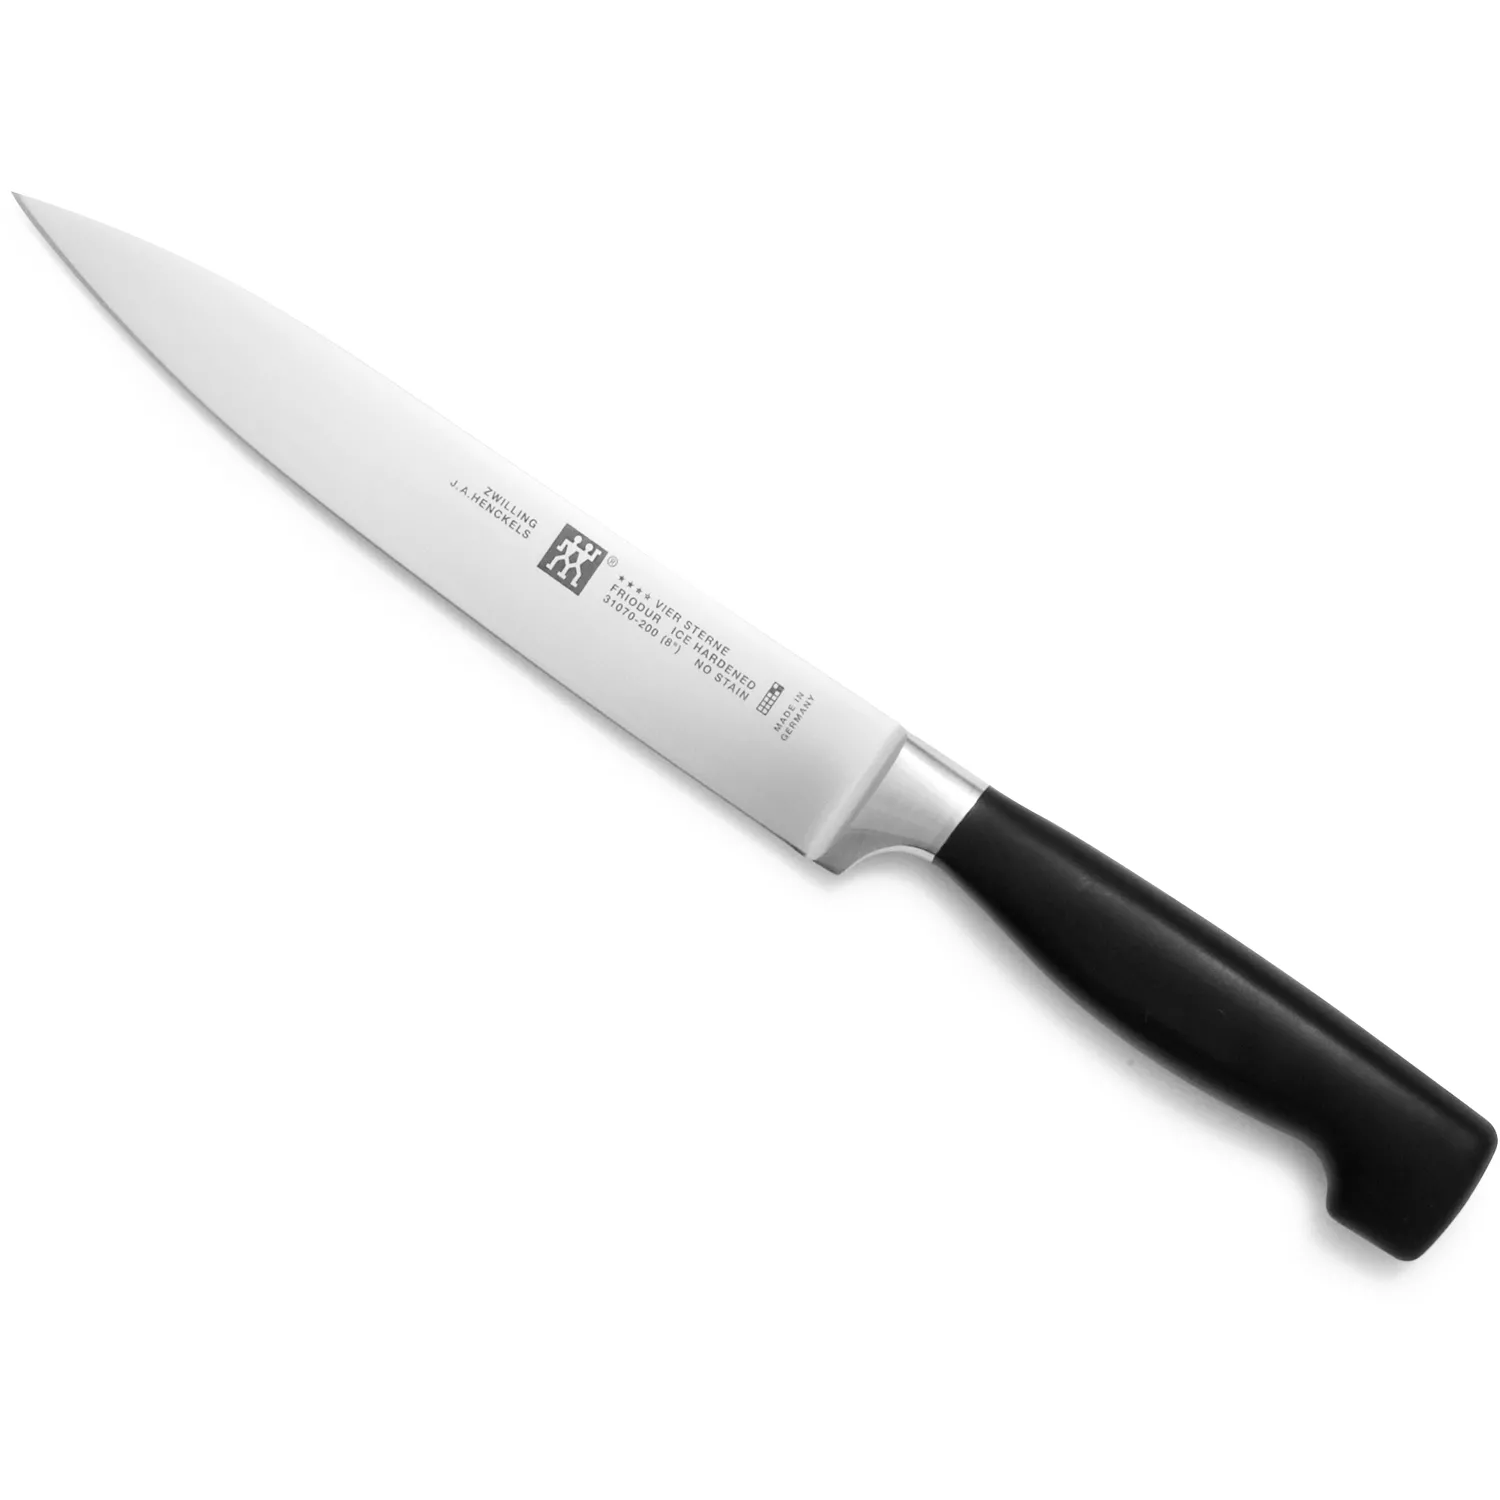 Zwilling J.A. Henckels TWIN Four Star 8 inch Chef's Knife